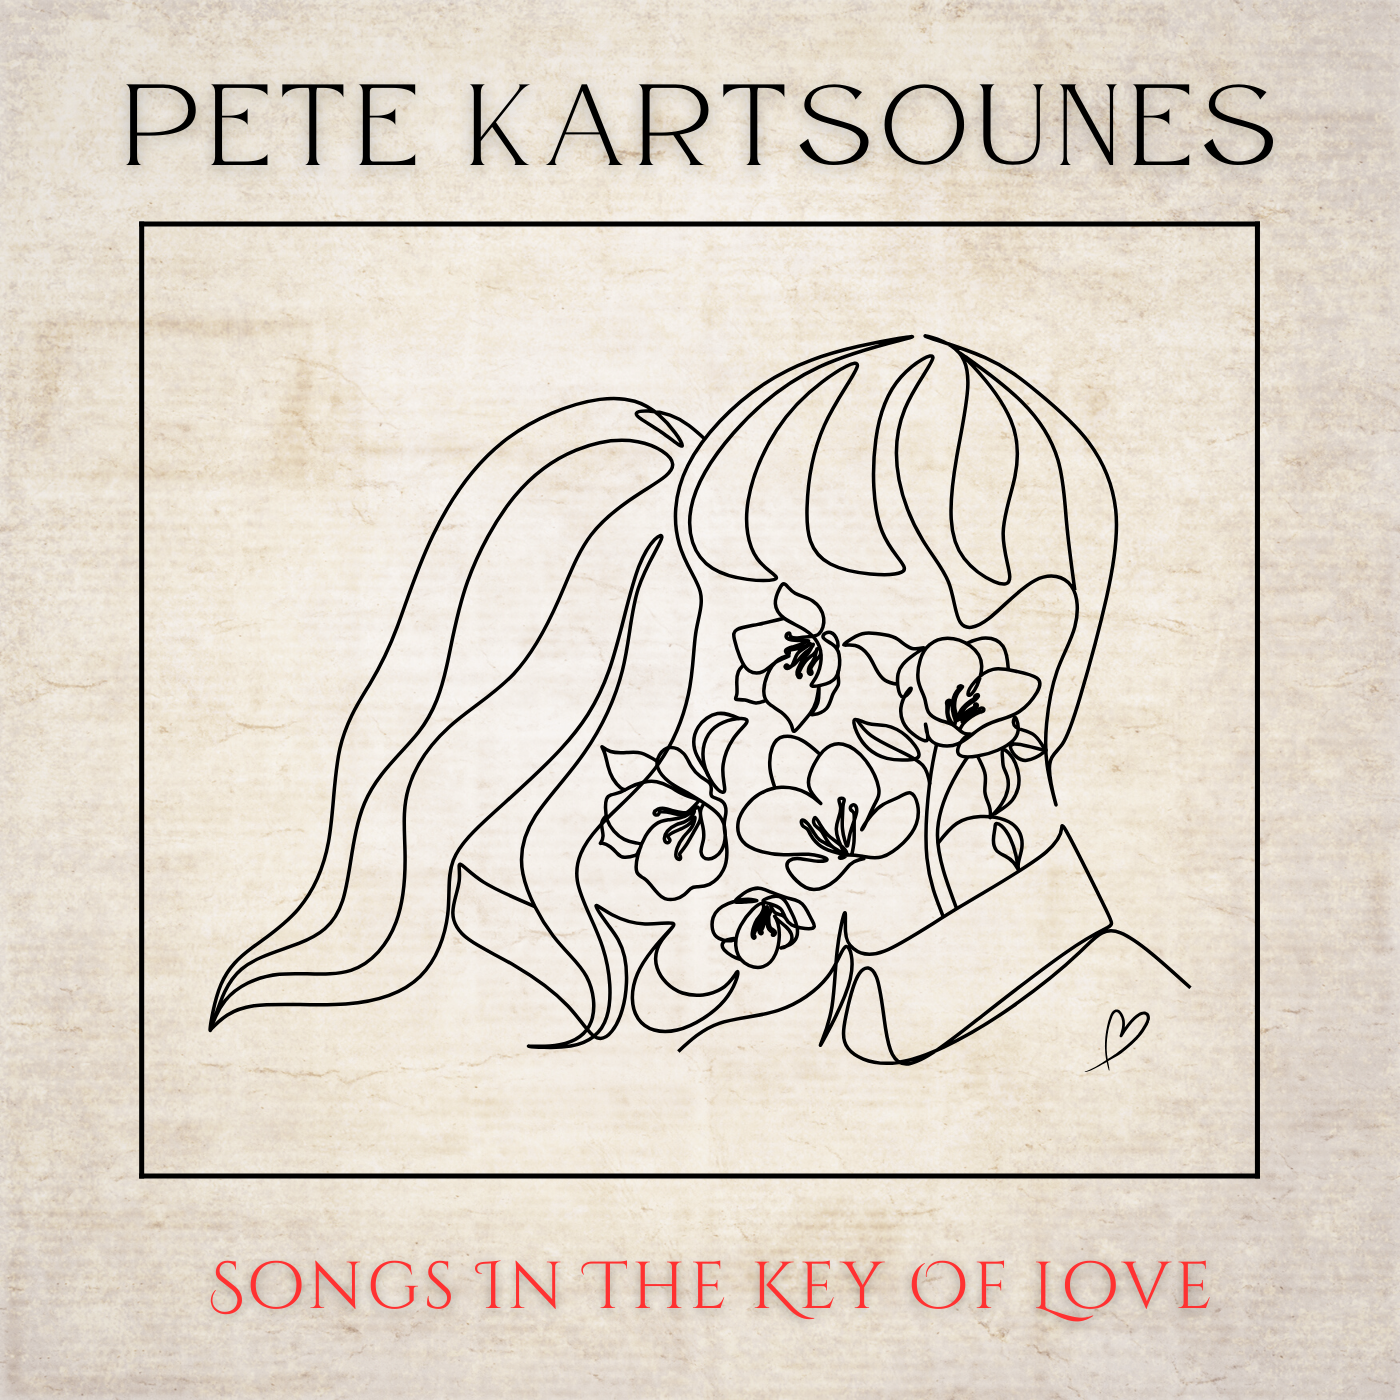 Pete Kartsounes | Songs in the Key of Love | Available Worldwide on 3/22/24